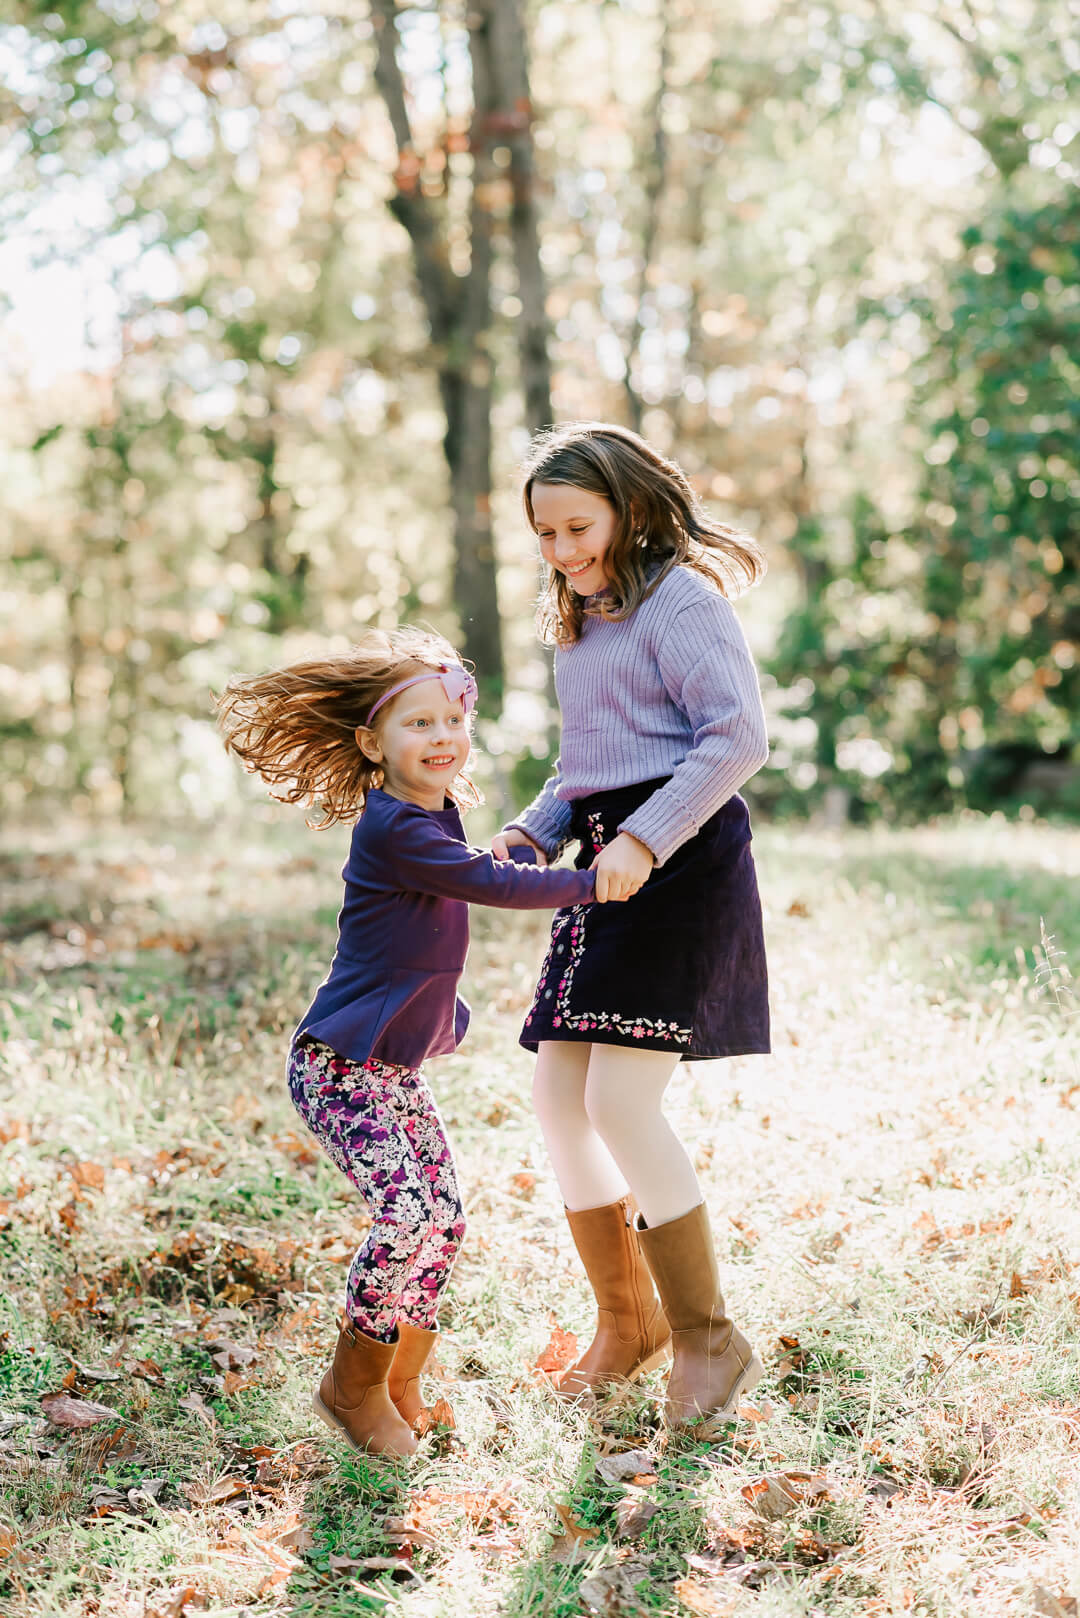 Two young sisters dance and play in purple outfits in a forest field after visiting einstein pediatrics